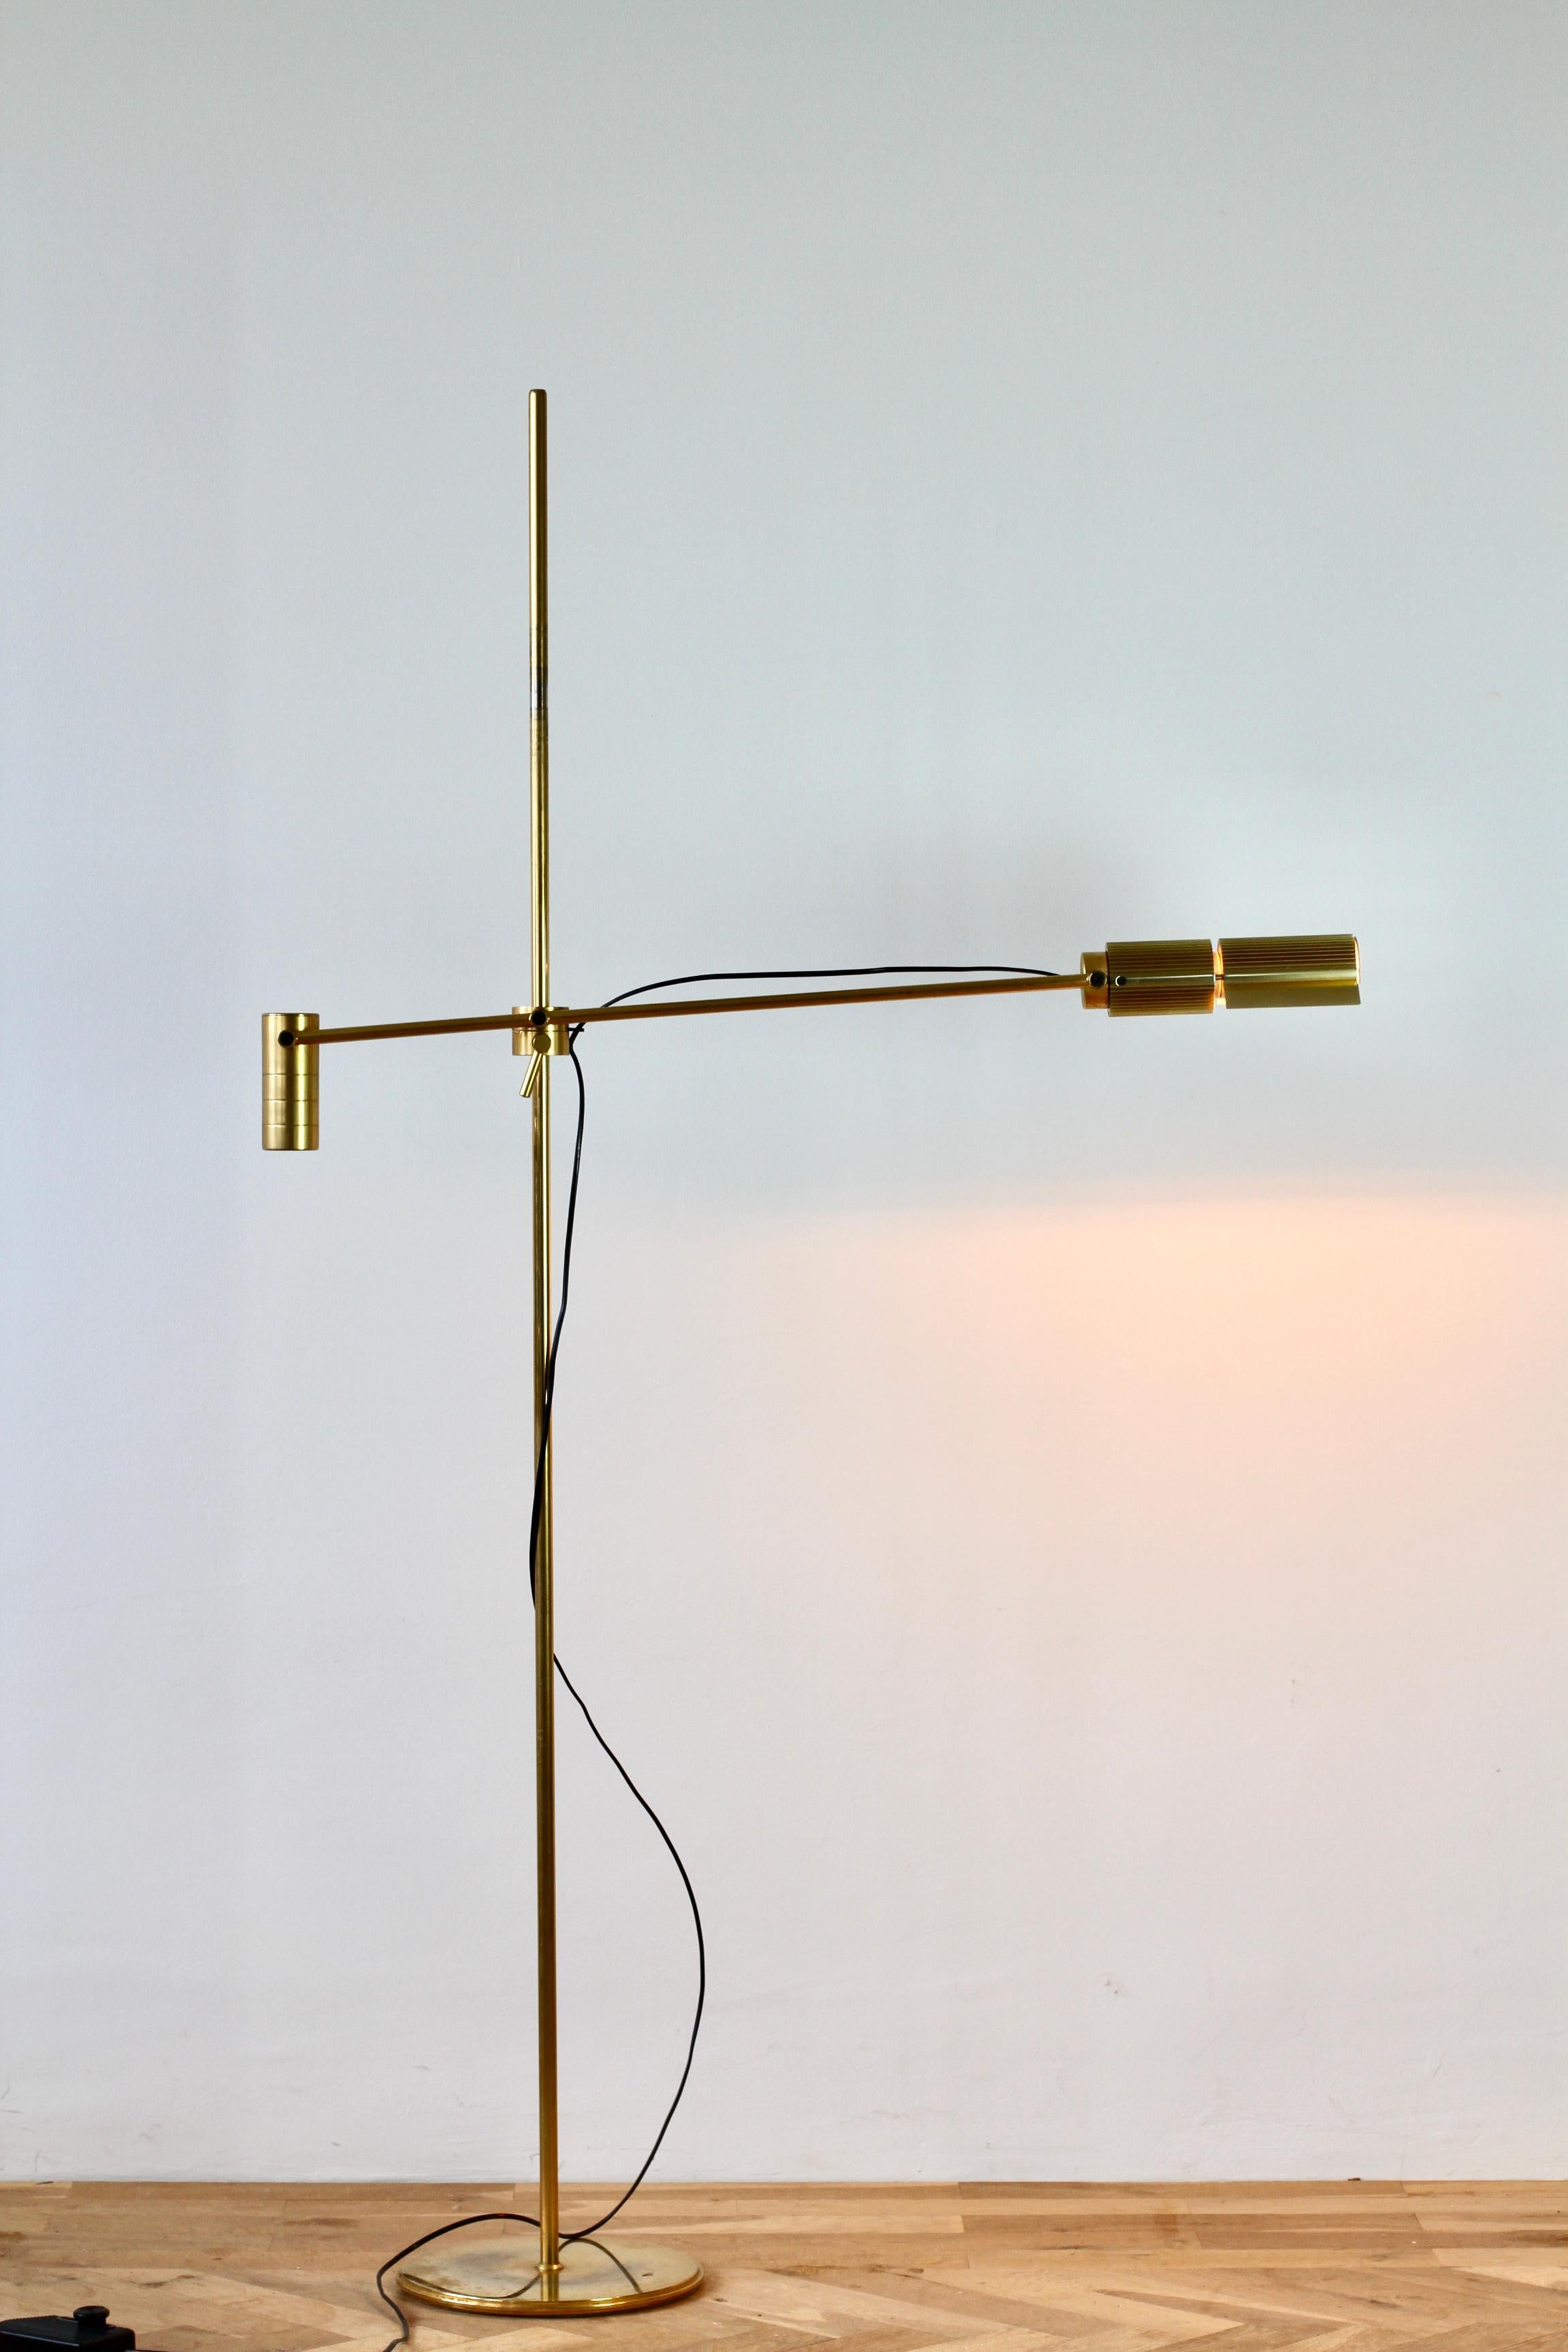 Rare Mid-Century Modern vintage European, Swiss made dimmable 'Haloprofil' floor lamp designed by Viktor Frauenknecht for Swiss Lamps International circa 1970s - early 1980s. Featuring gold plated brass (now with age related patina) and fully height